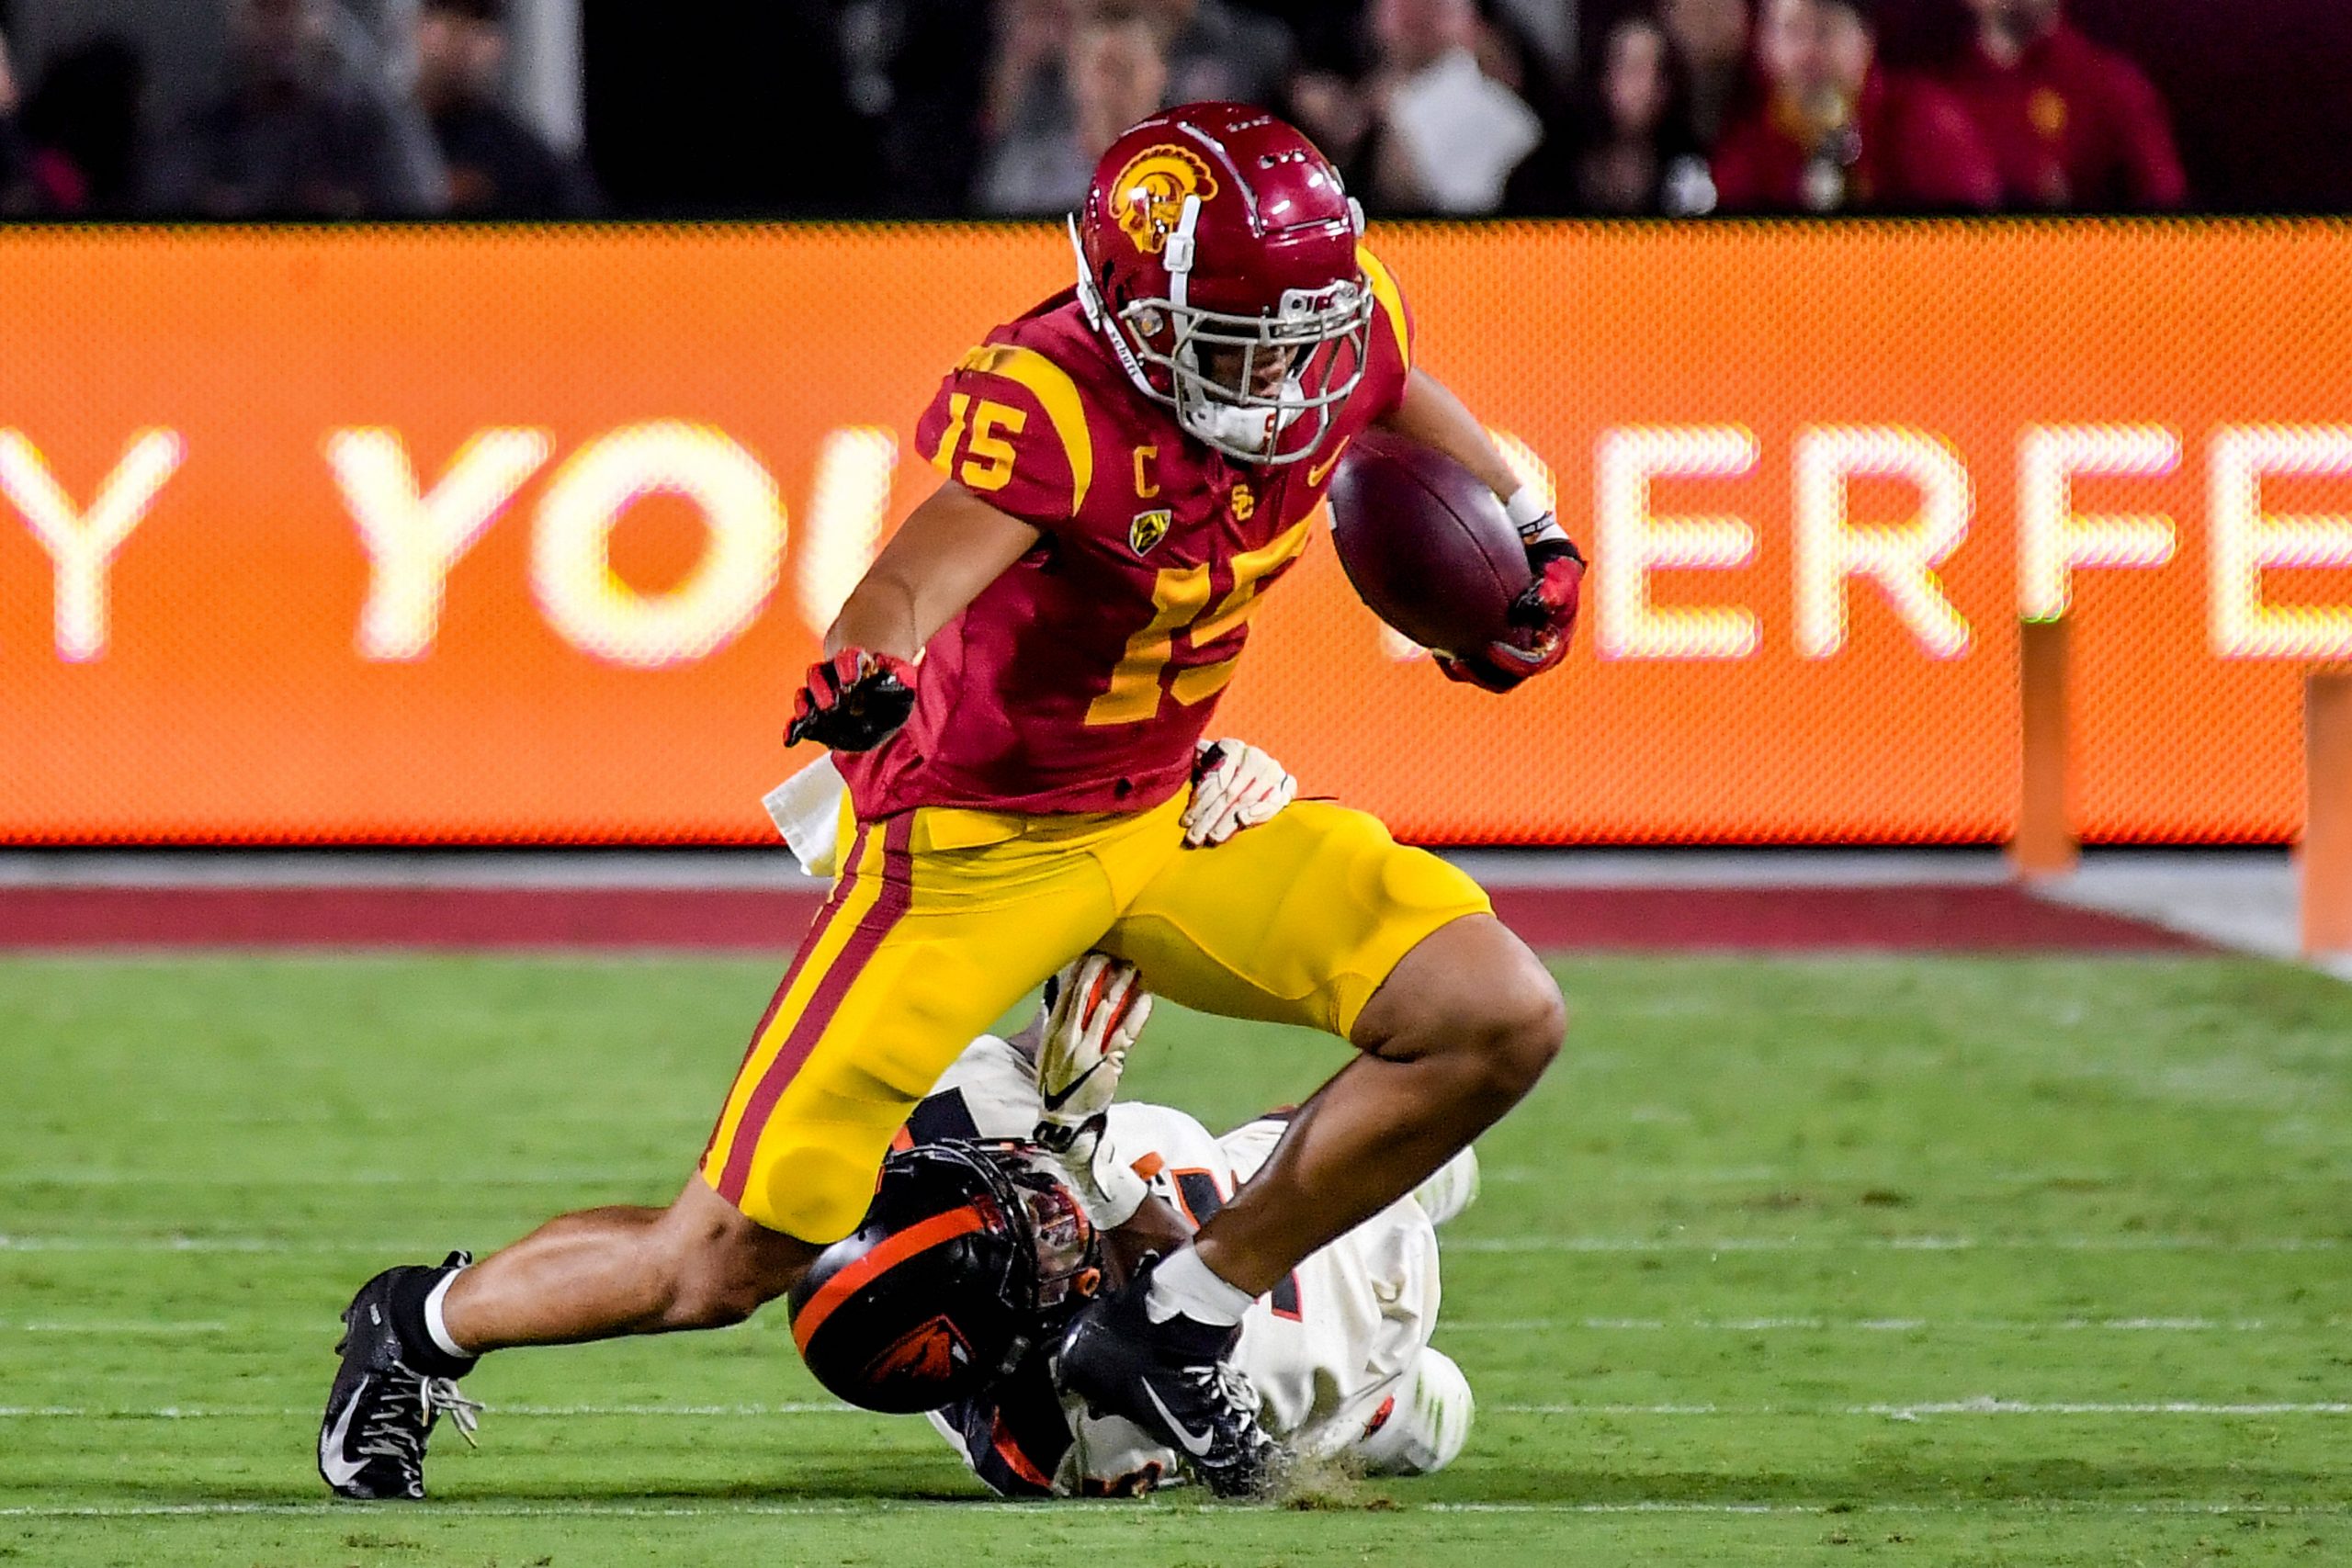 September 25, 2021 Los Angeles, CA.USC Trojans wide receiver Drake London 15 in action during the first quarter the NCAA